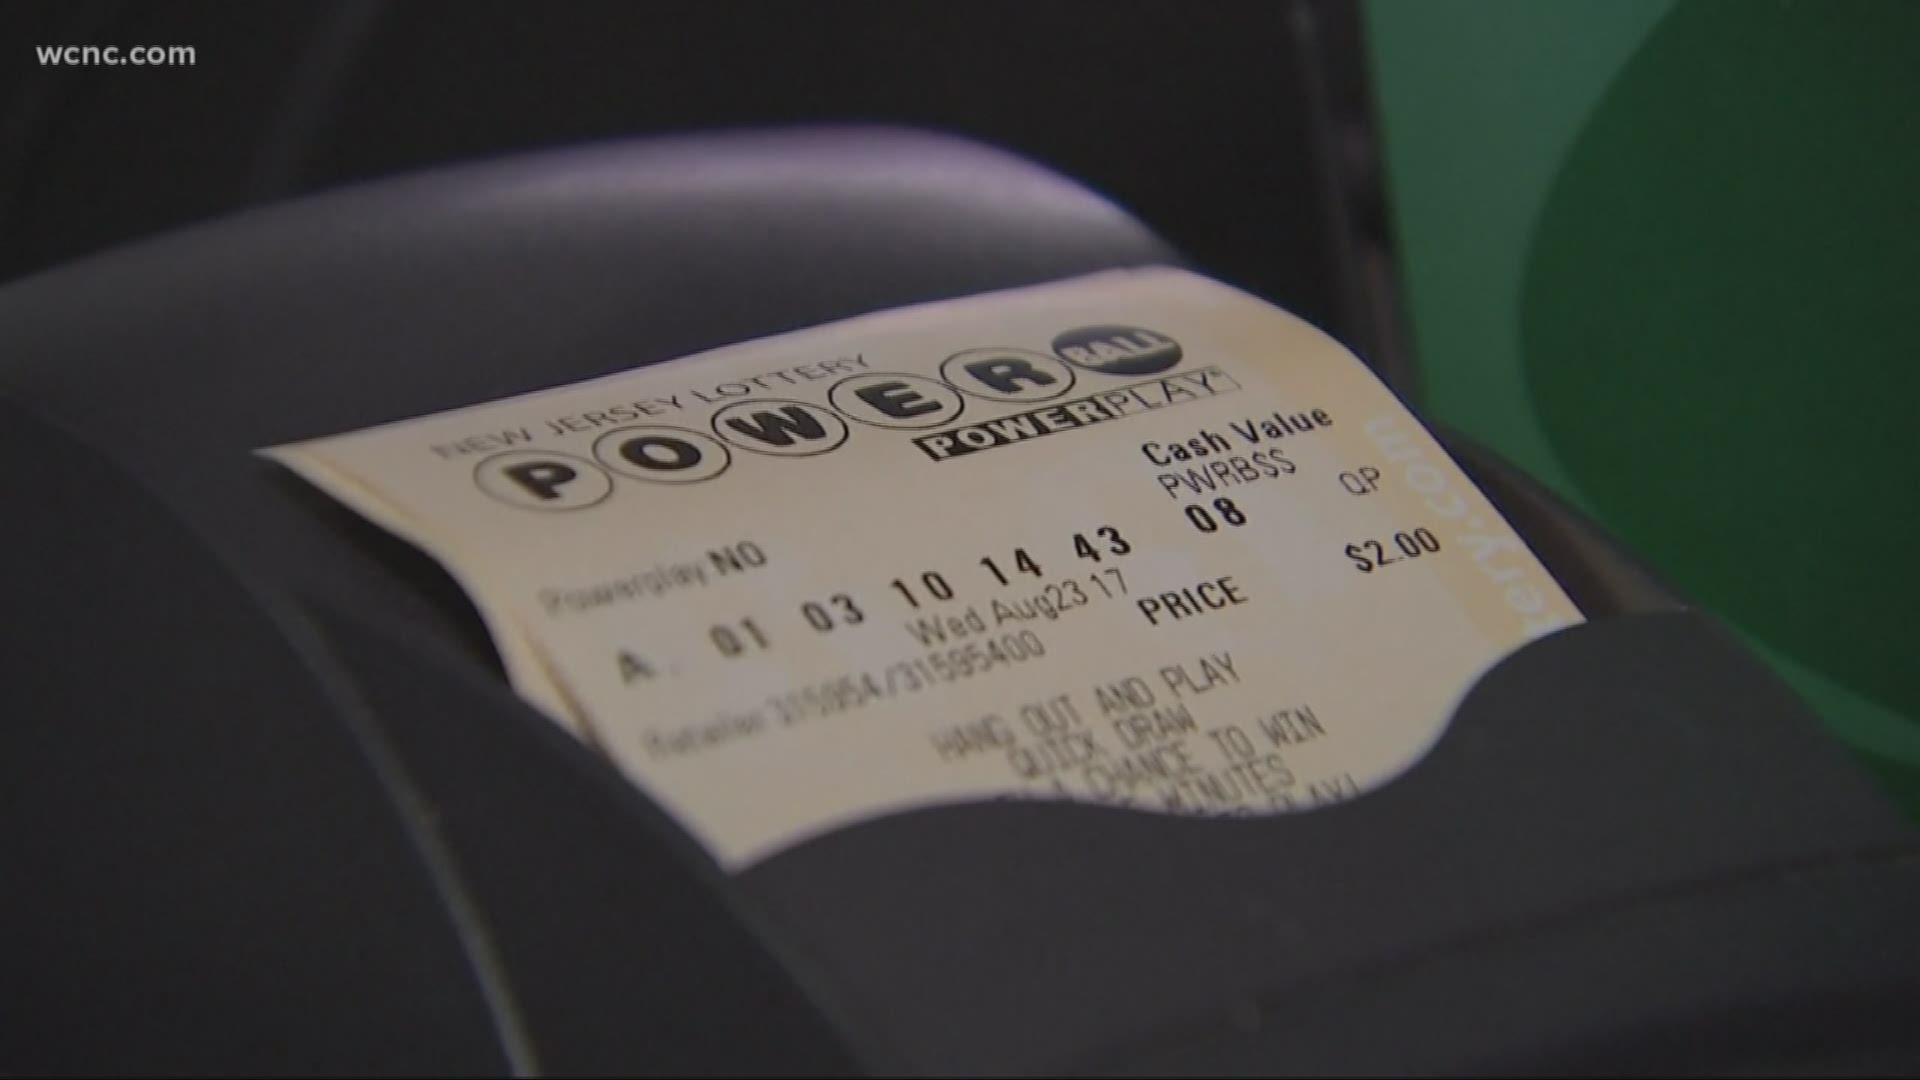 "Lotto fever" is sweeping the country and the Ccarolinas. Wednesday night's powerball jackpot is sitting at $750 million -- the fourth largest jackpot in U.S. history.